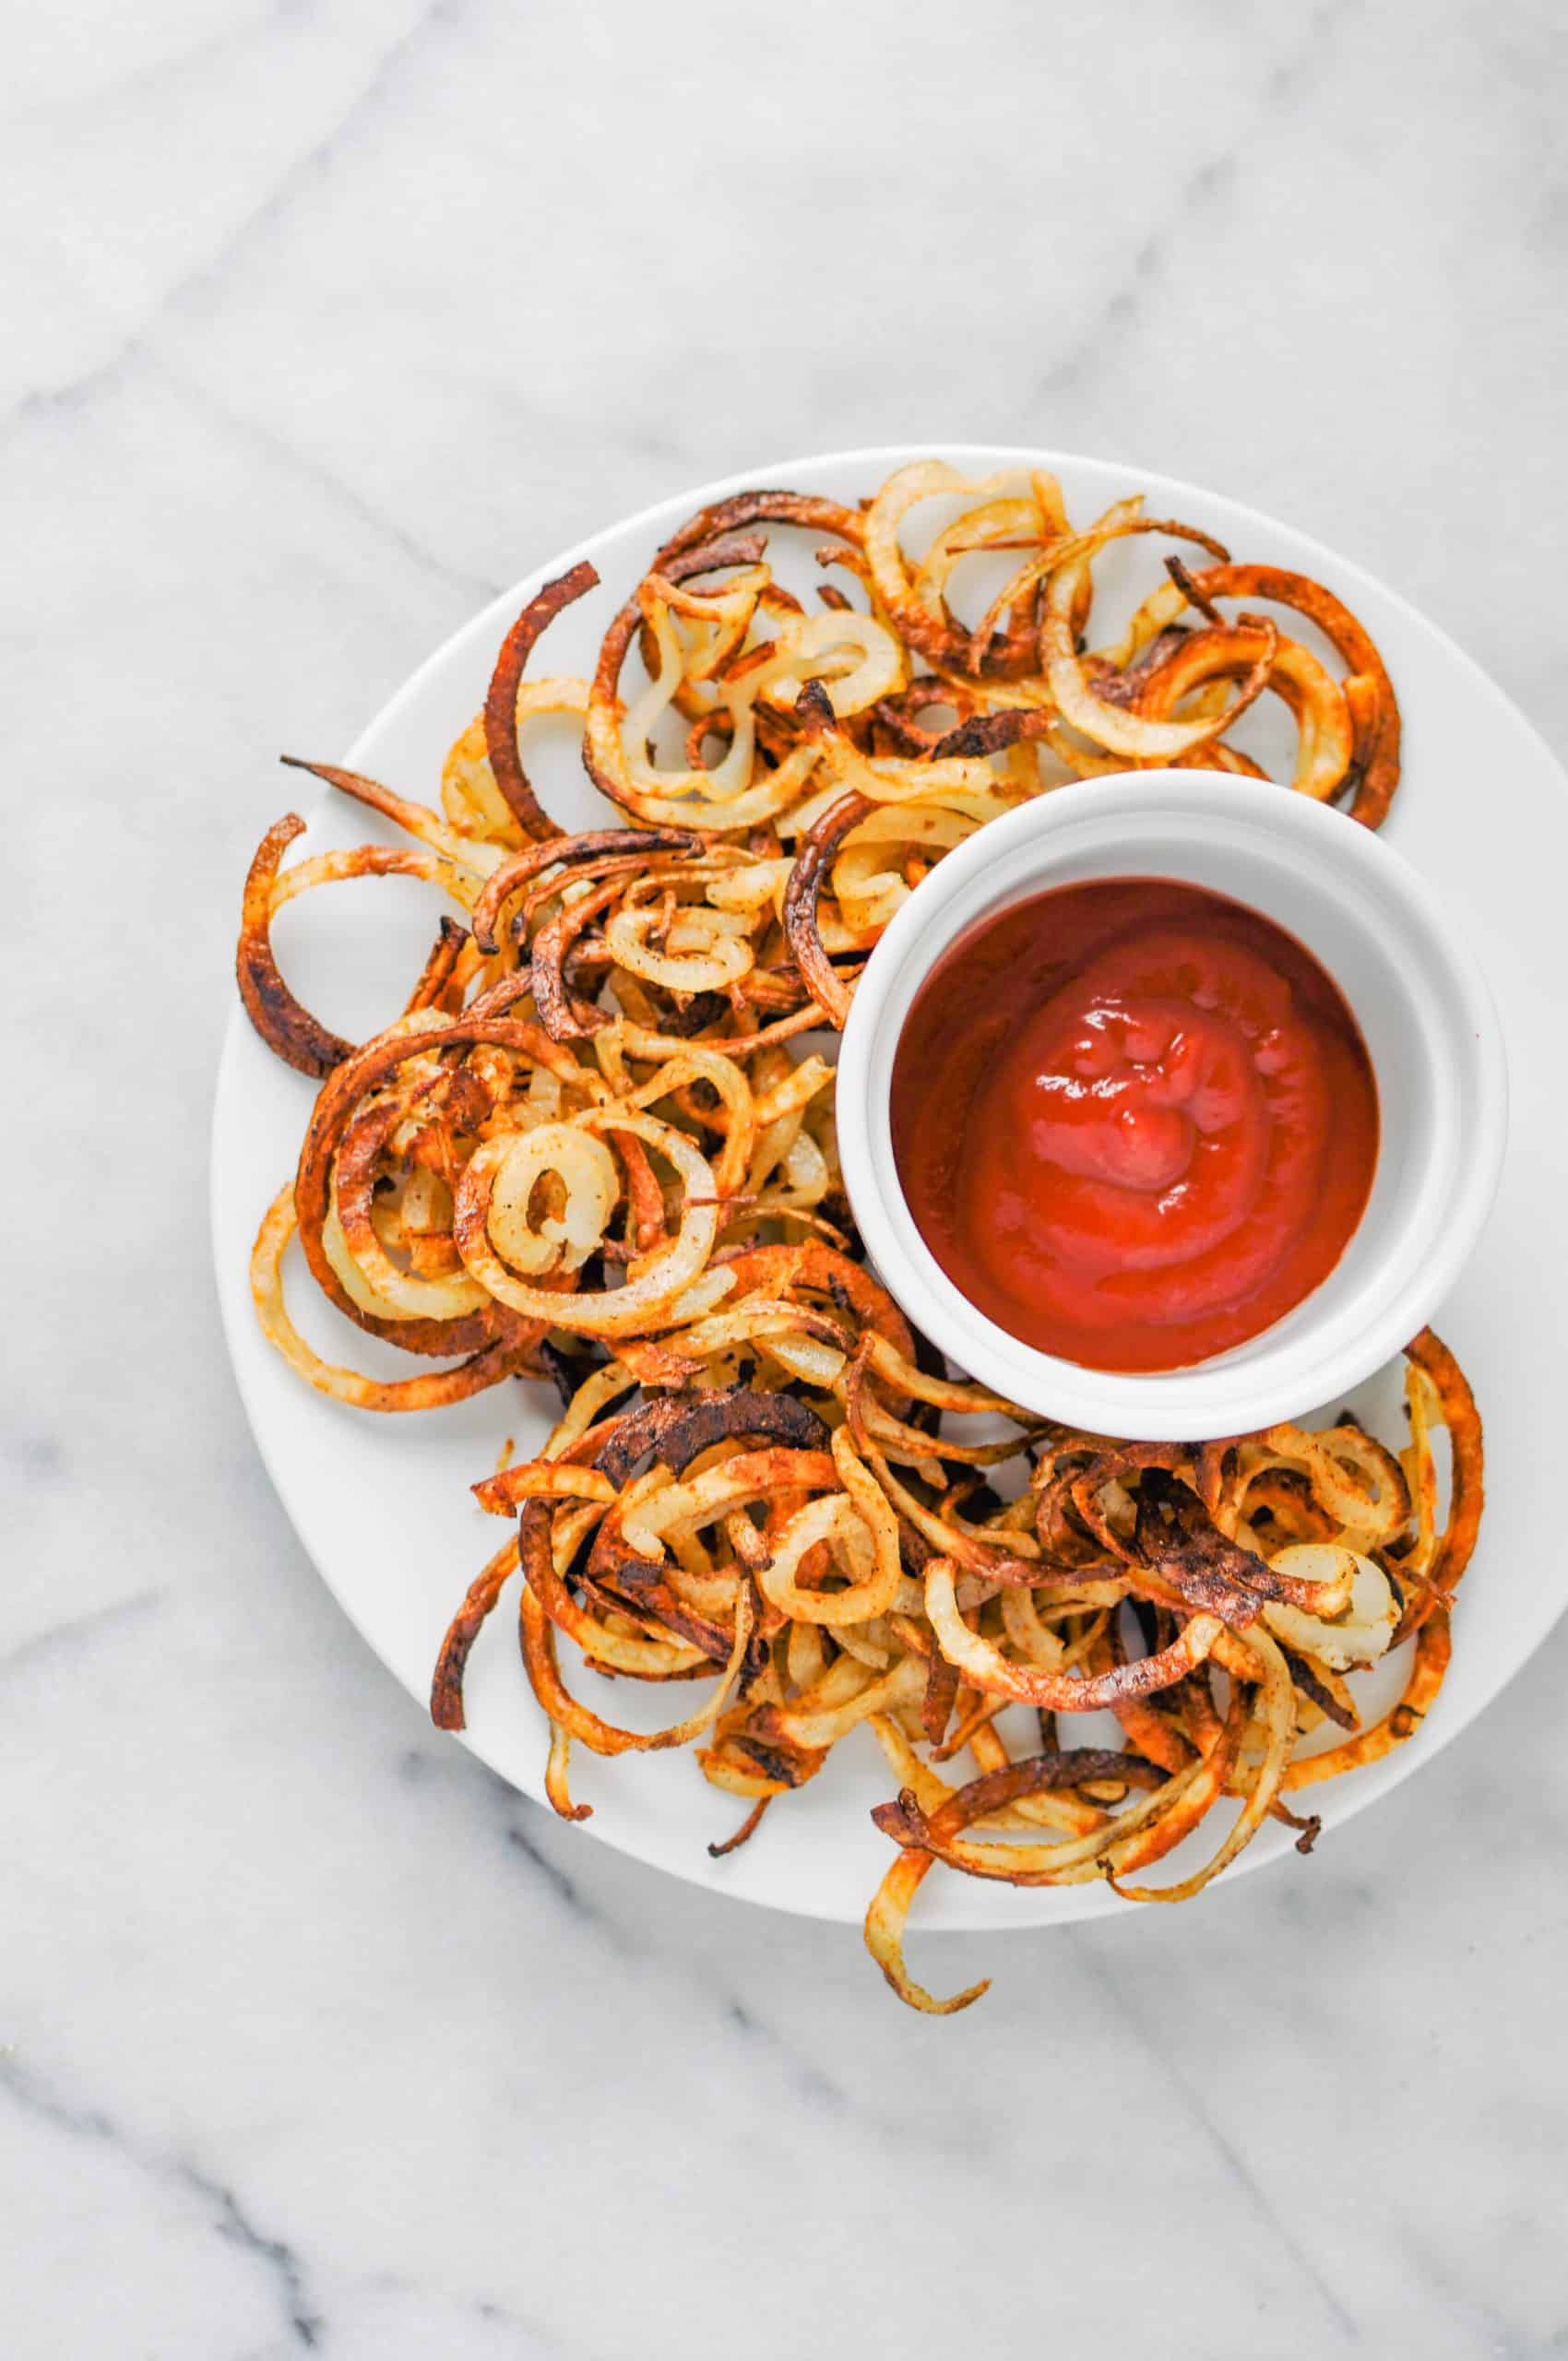 Baked Curly Fries Recipe - this healthy table